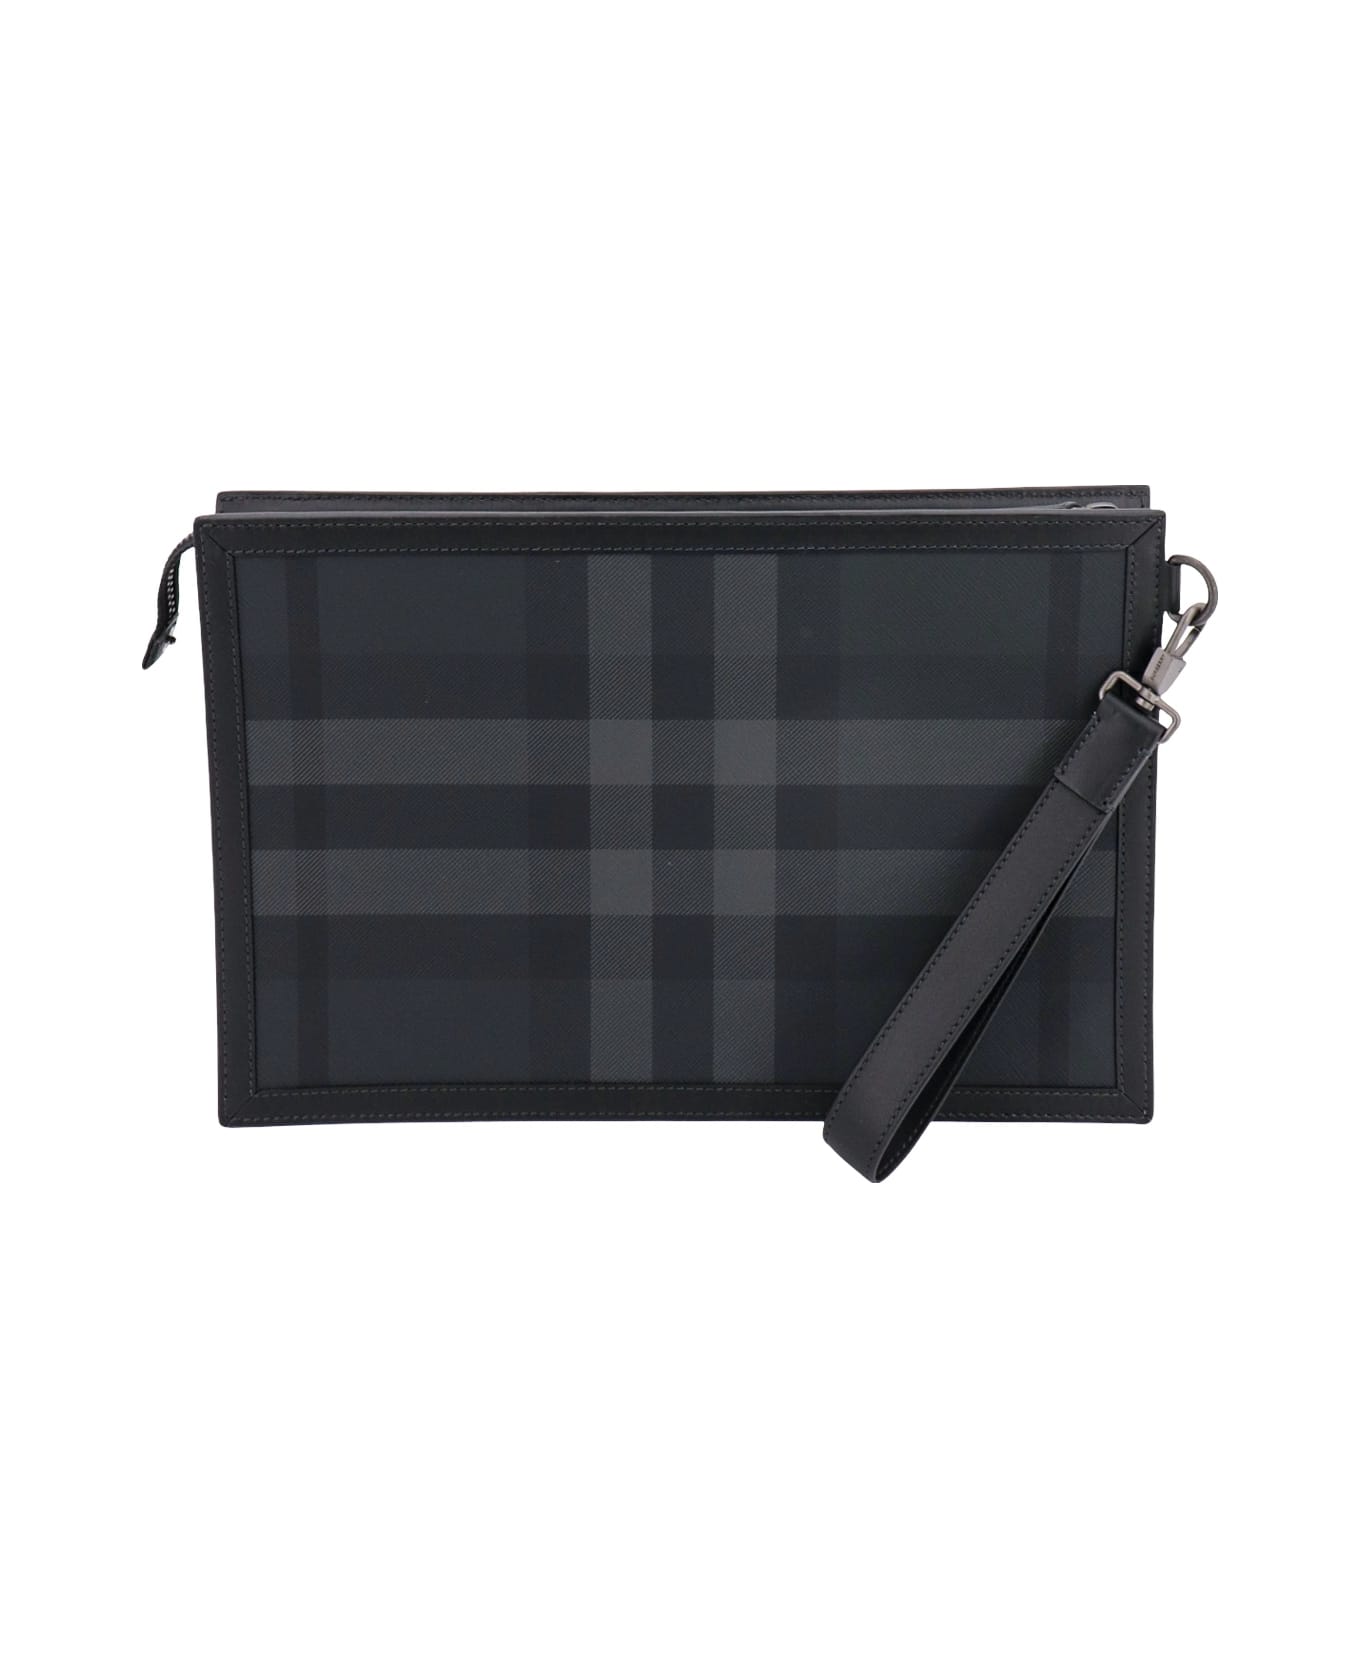 Burberry Frame Pouch - Black クラッチバッグ